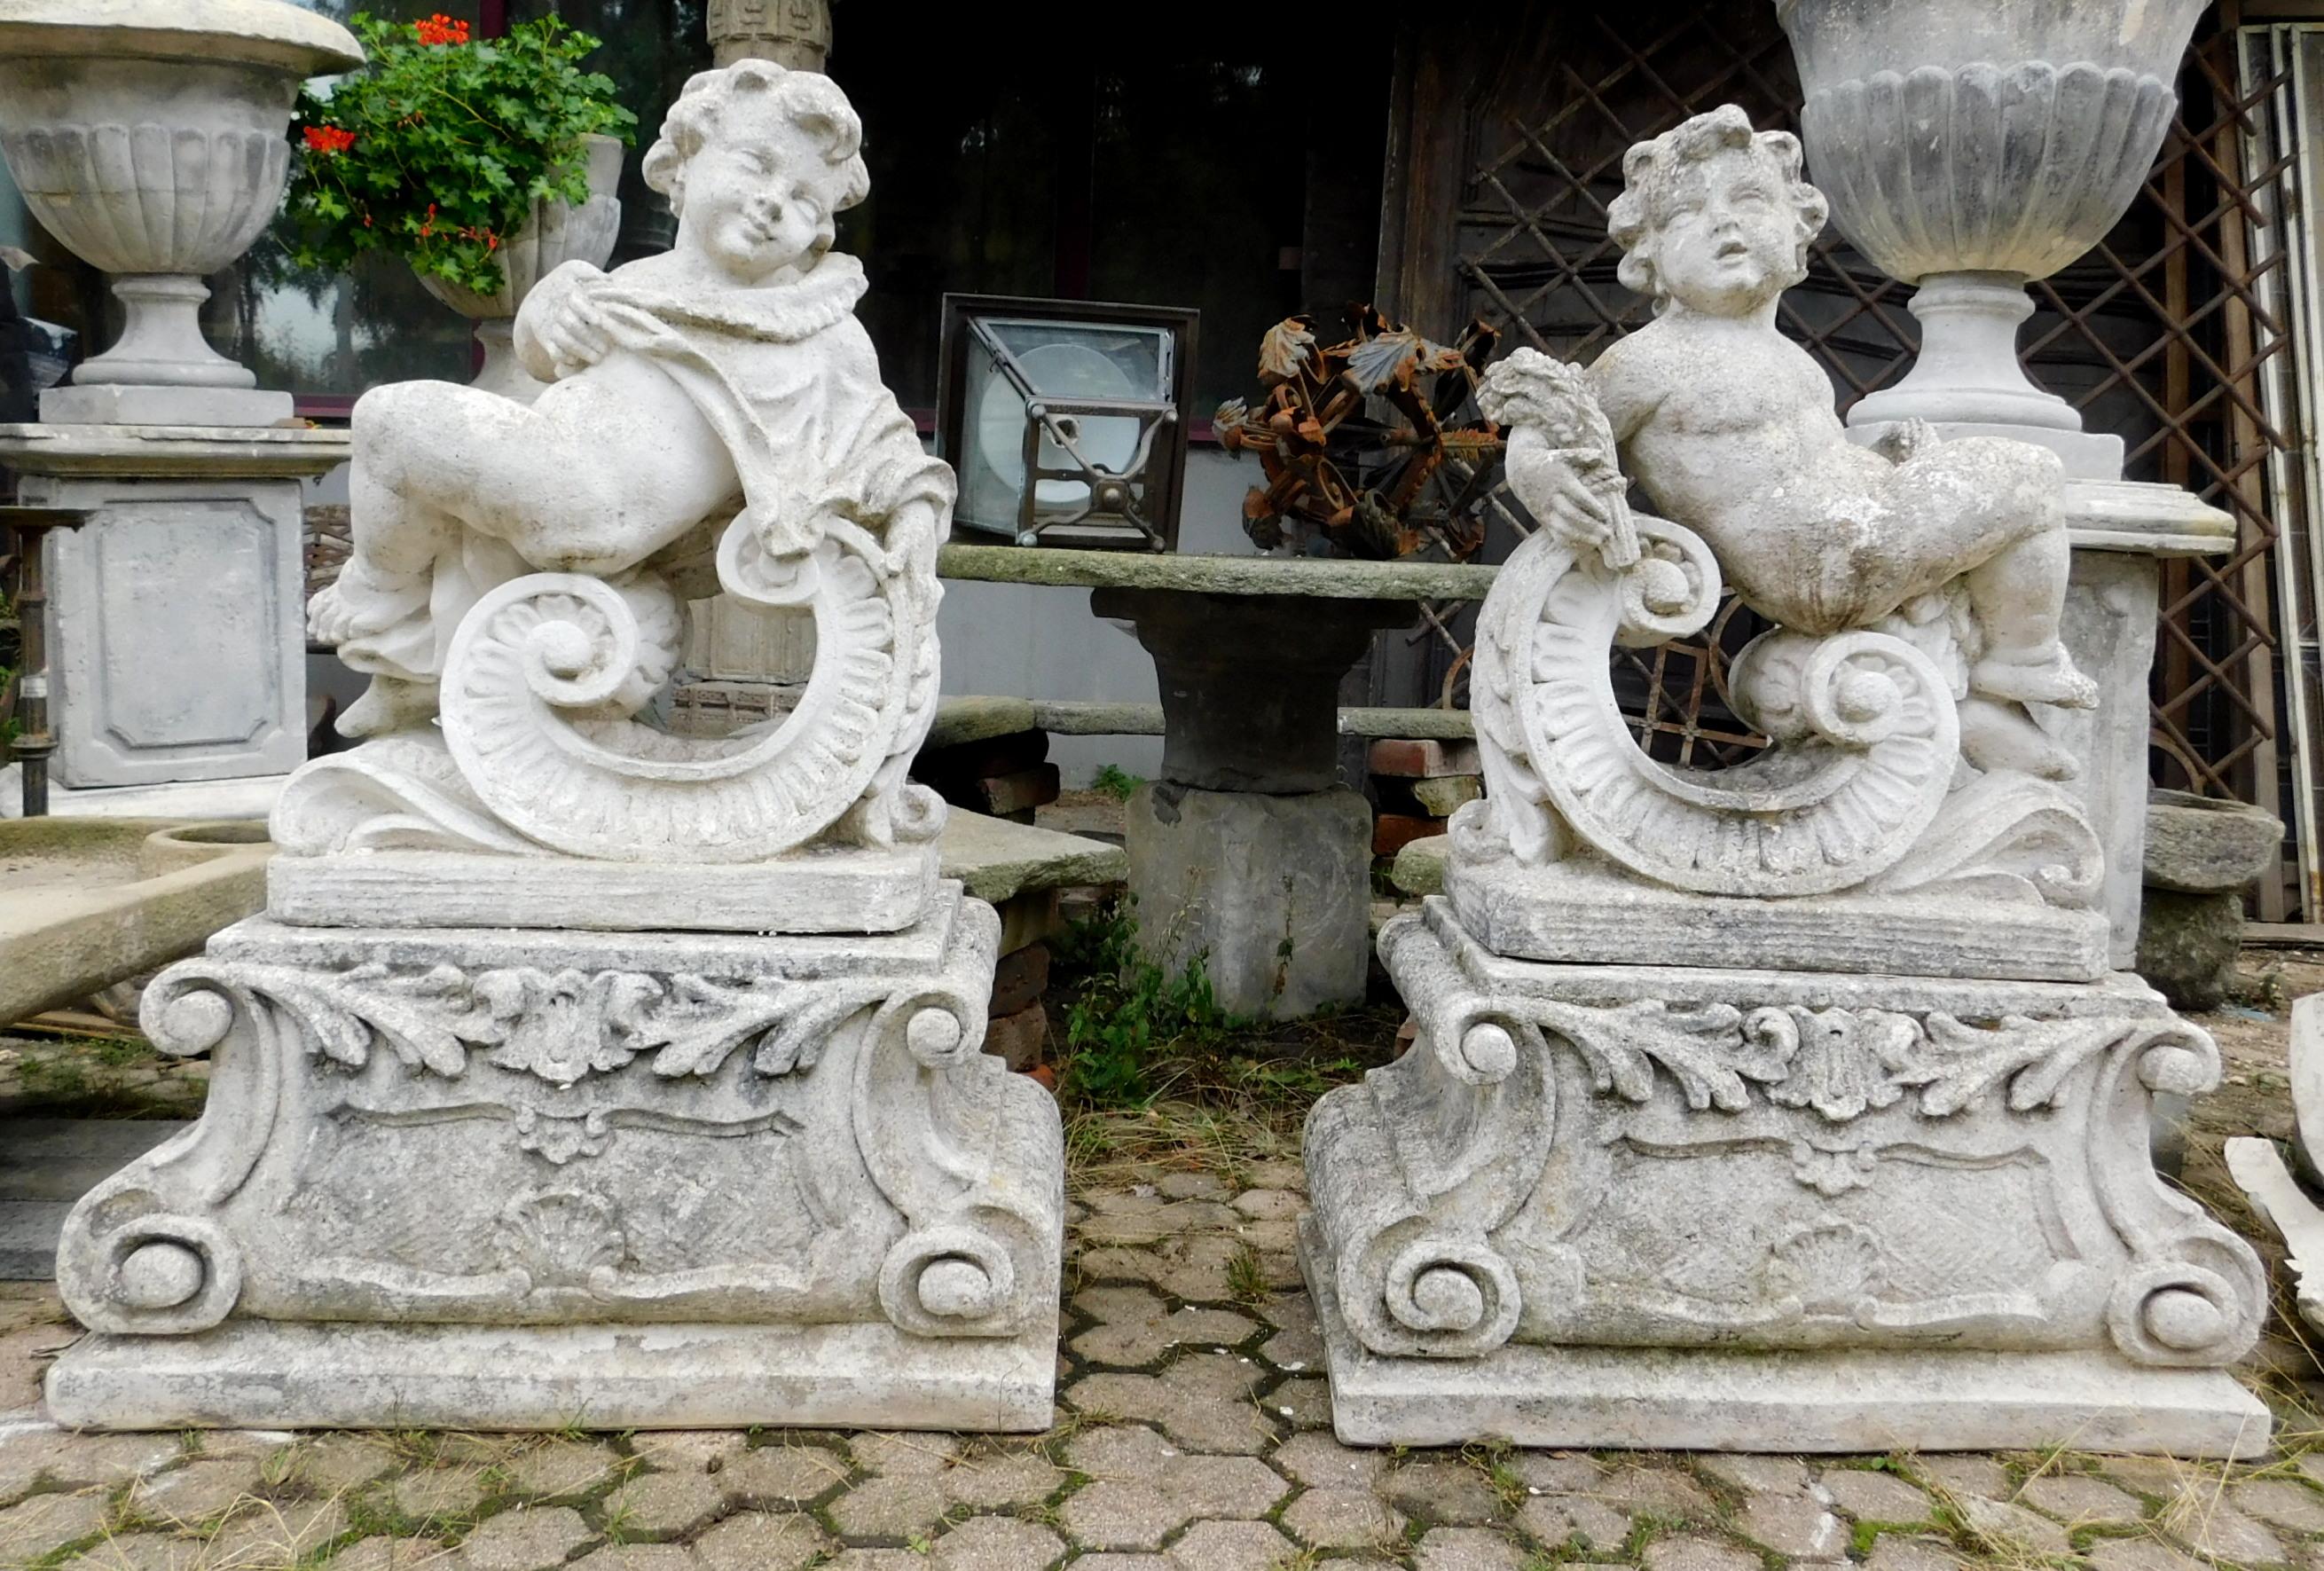 Vintage pair of stair masters in concrete, garden sculptures with cherubs, bases or decorations for gardens and patios, sculpted in concrete, at the beginning of the 20th century in Italy.
Beautiful and useful for decorating a garden, a rustic